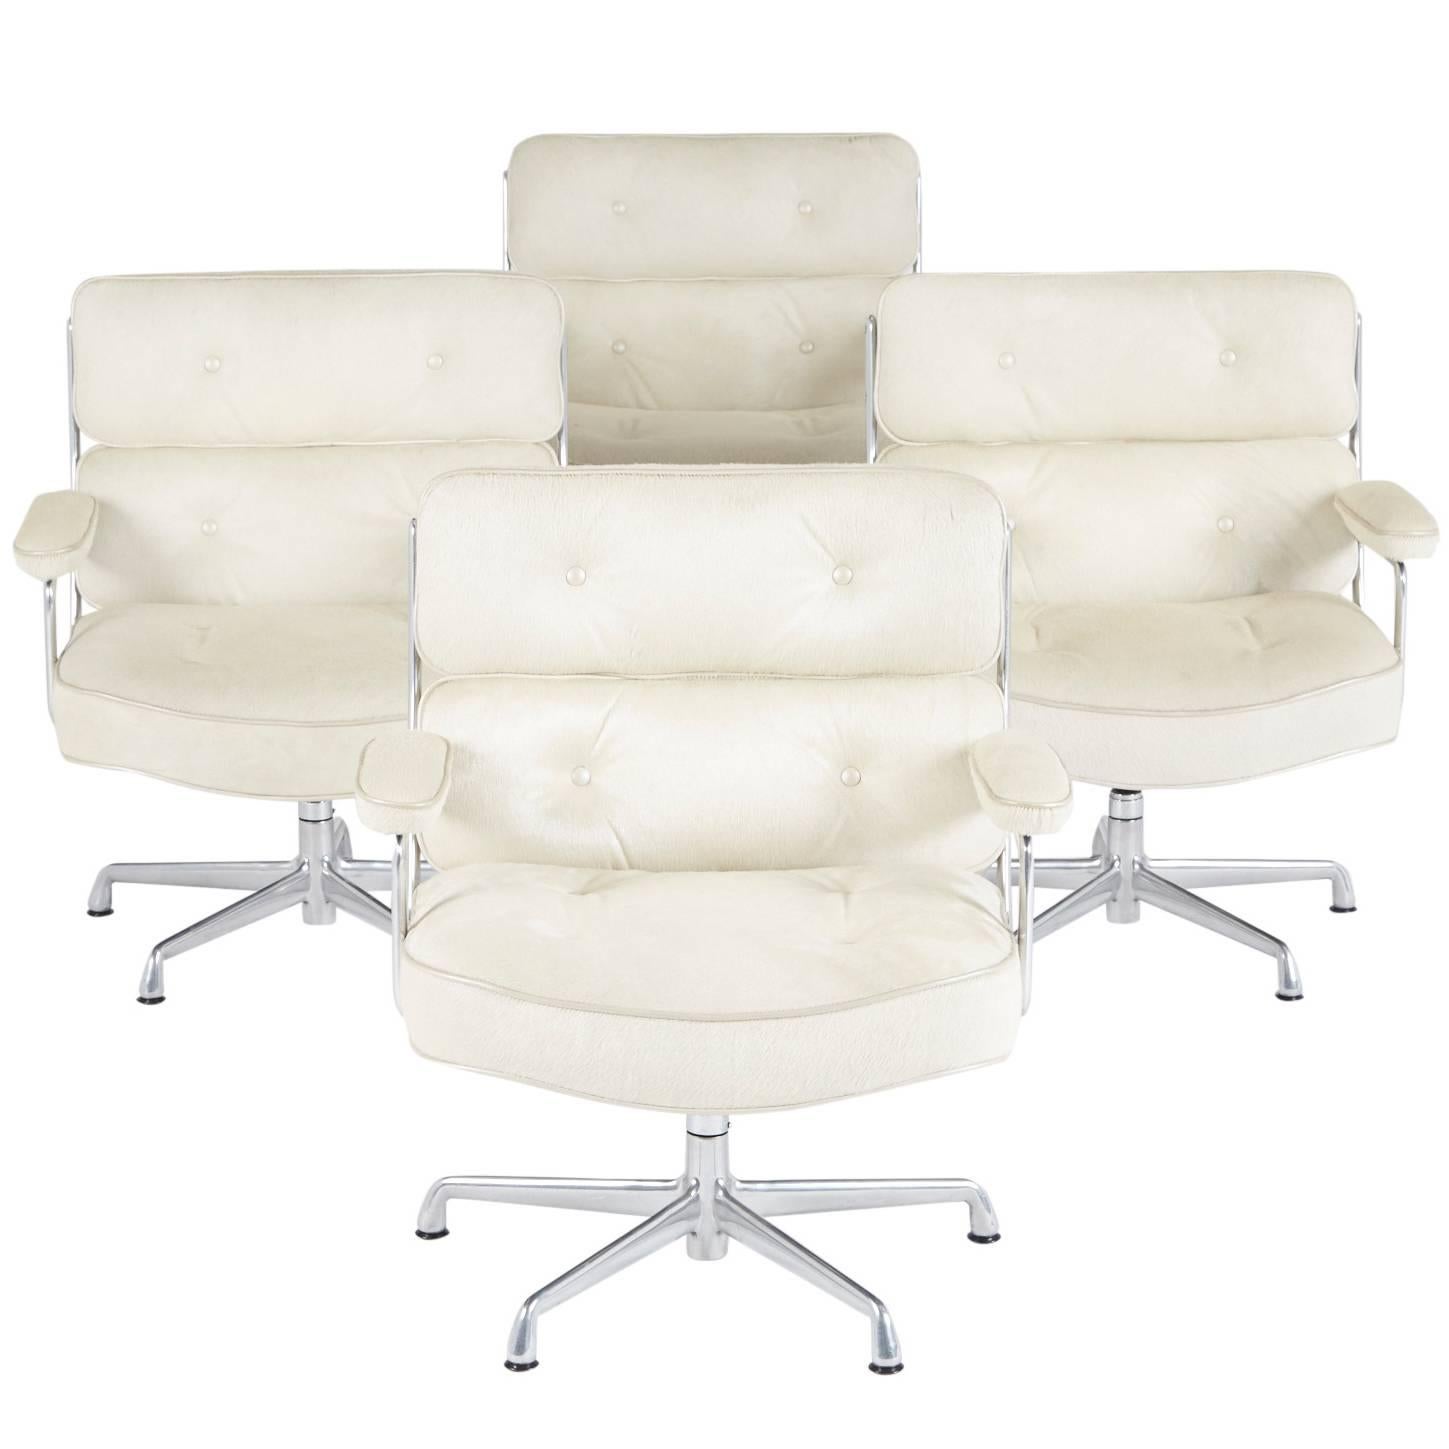 Late 20th Century Hair-on Hide Time Life Lobby Chairs by Eames for Herman Miller (Only 1 Left)